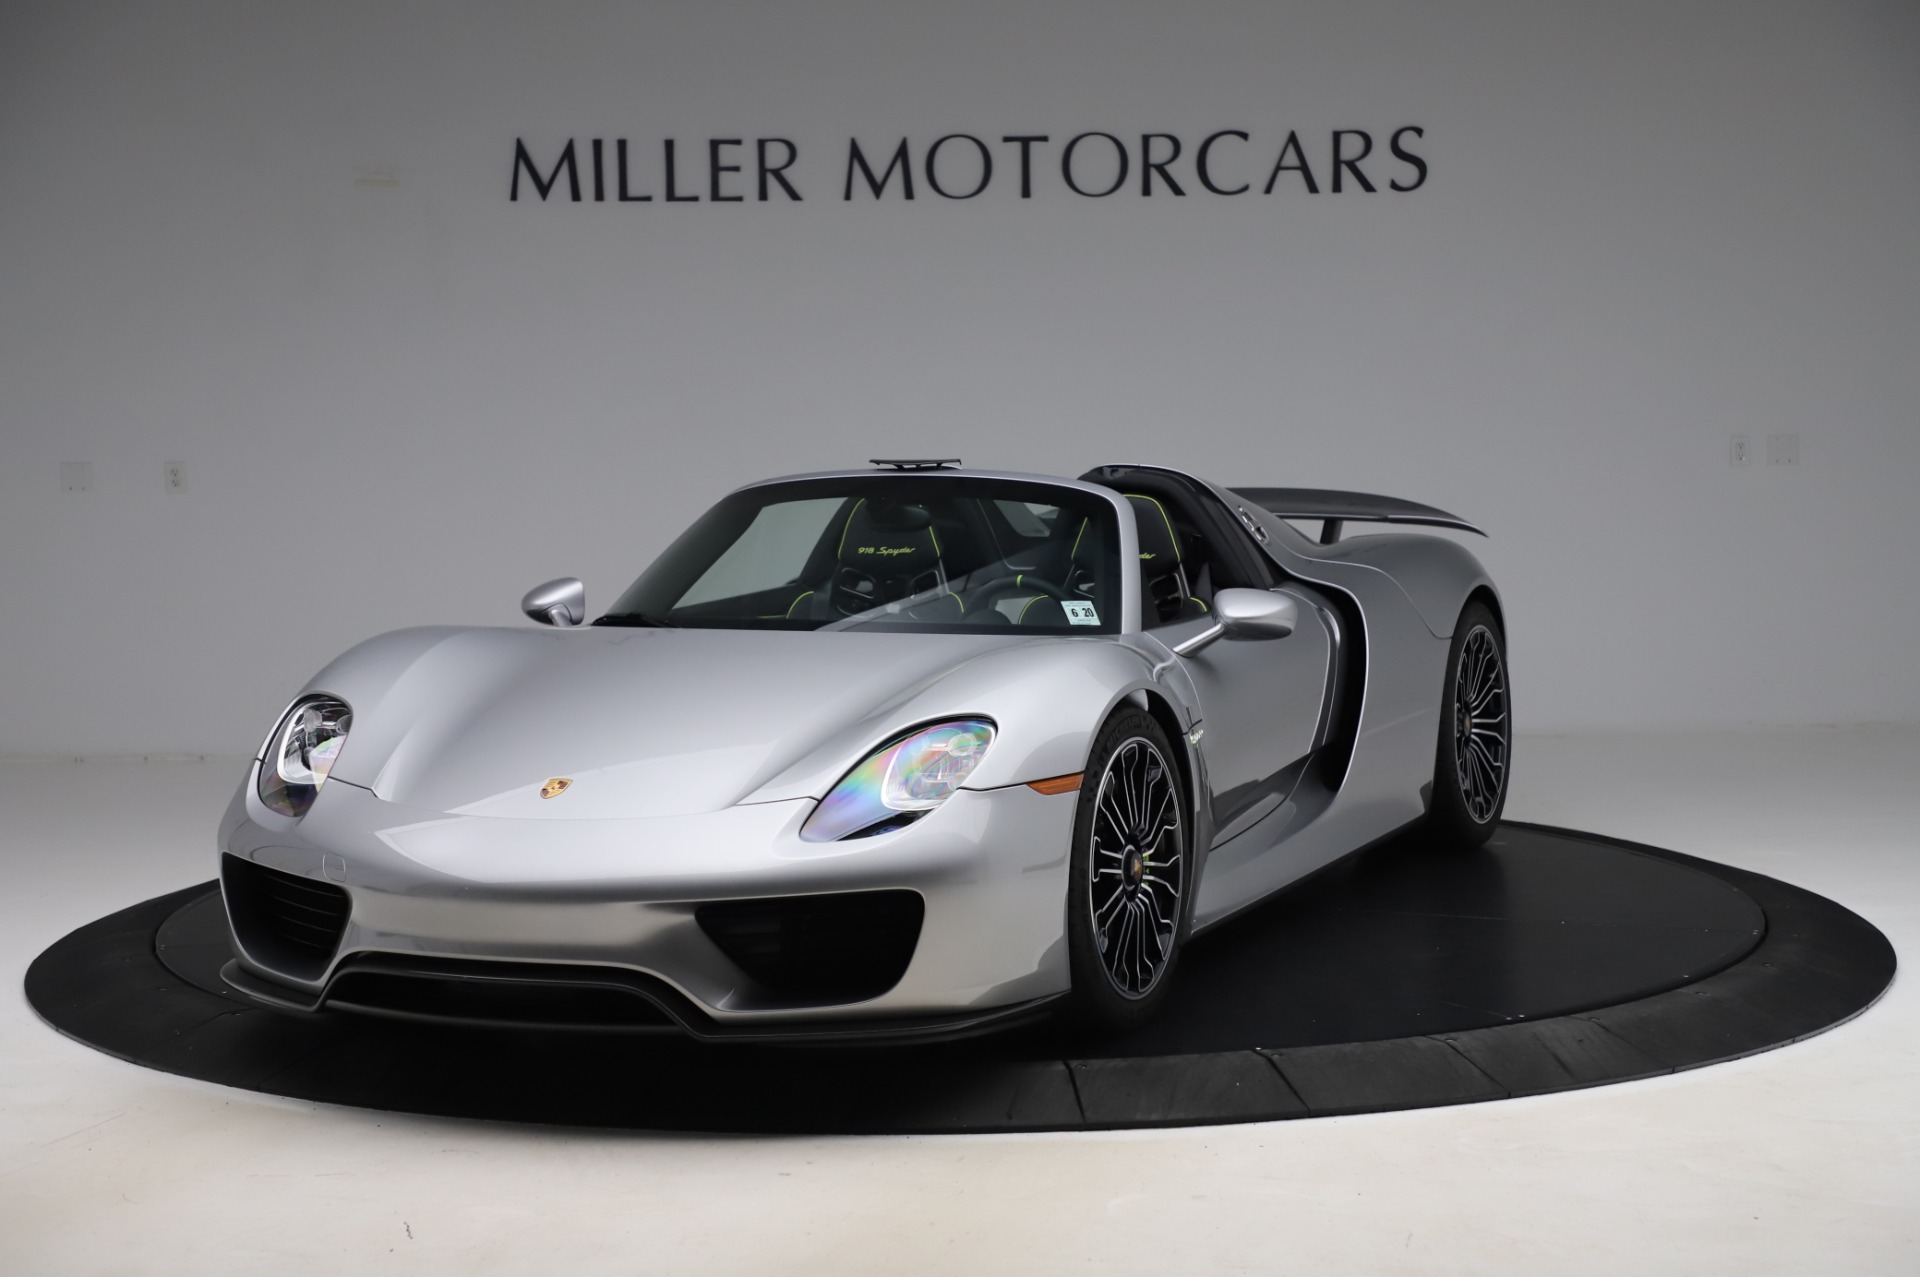 Used 2015 Porsche 918 Spyder for sale Sold at Bentley Greenwich in Greenwich CT 06830 1